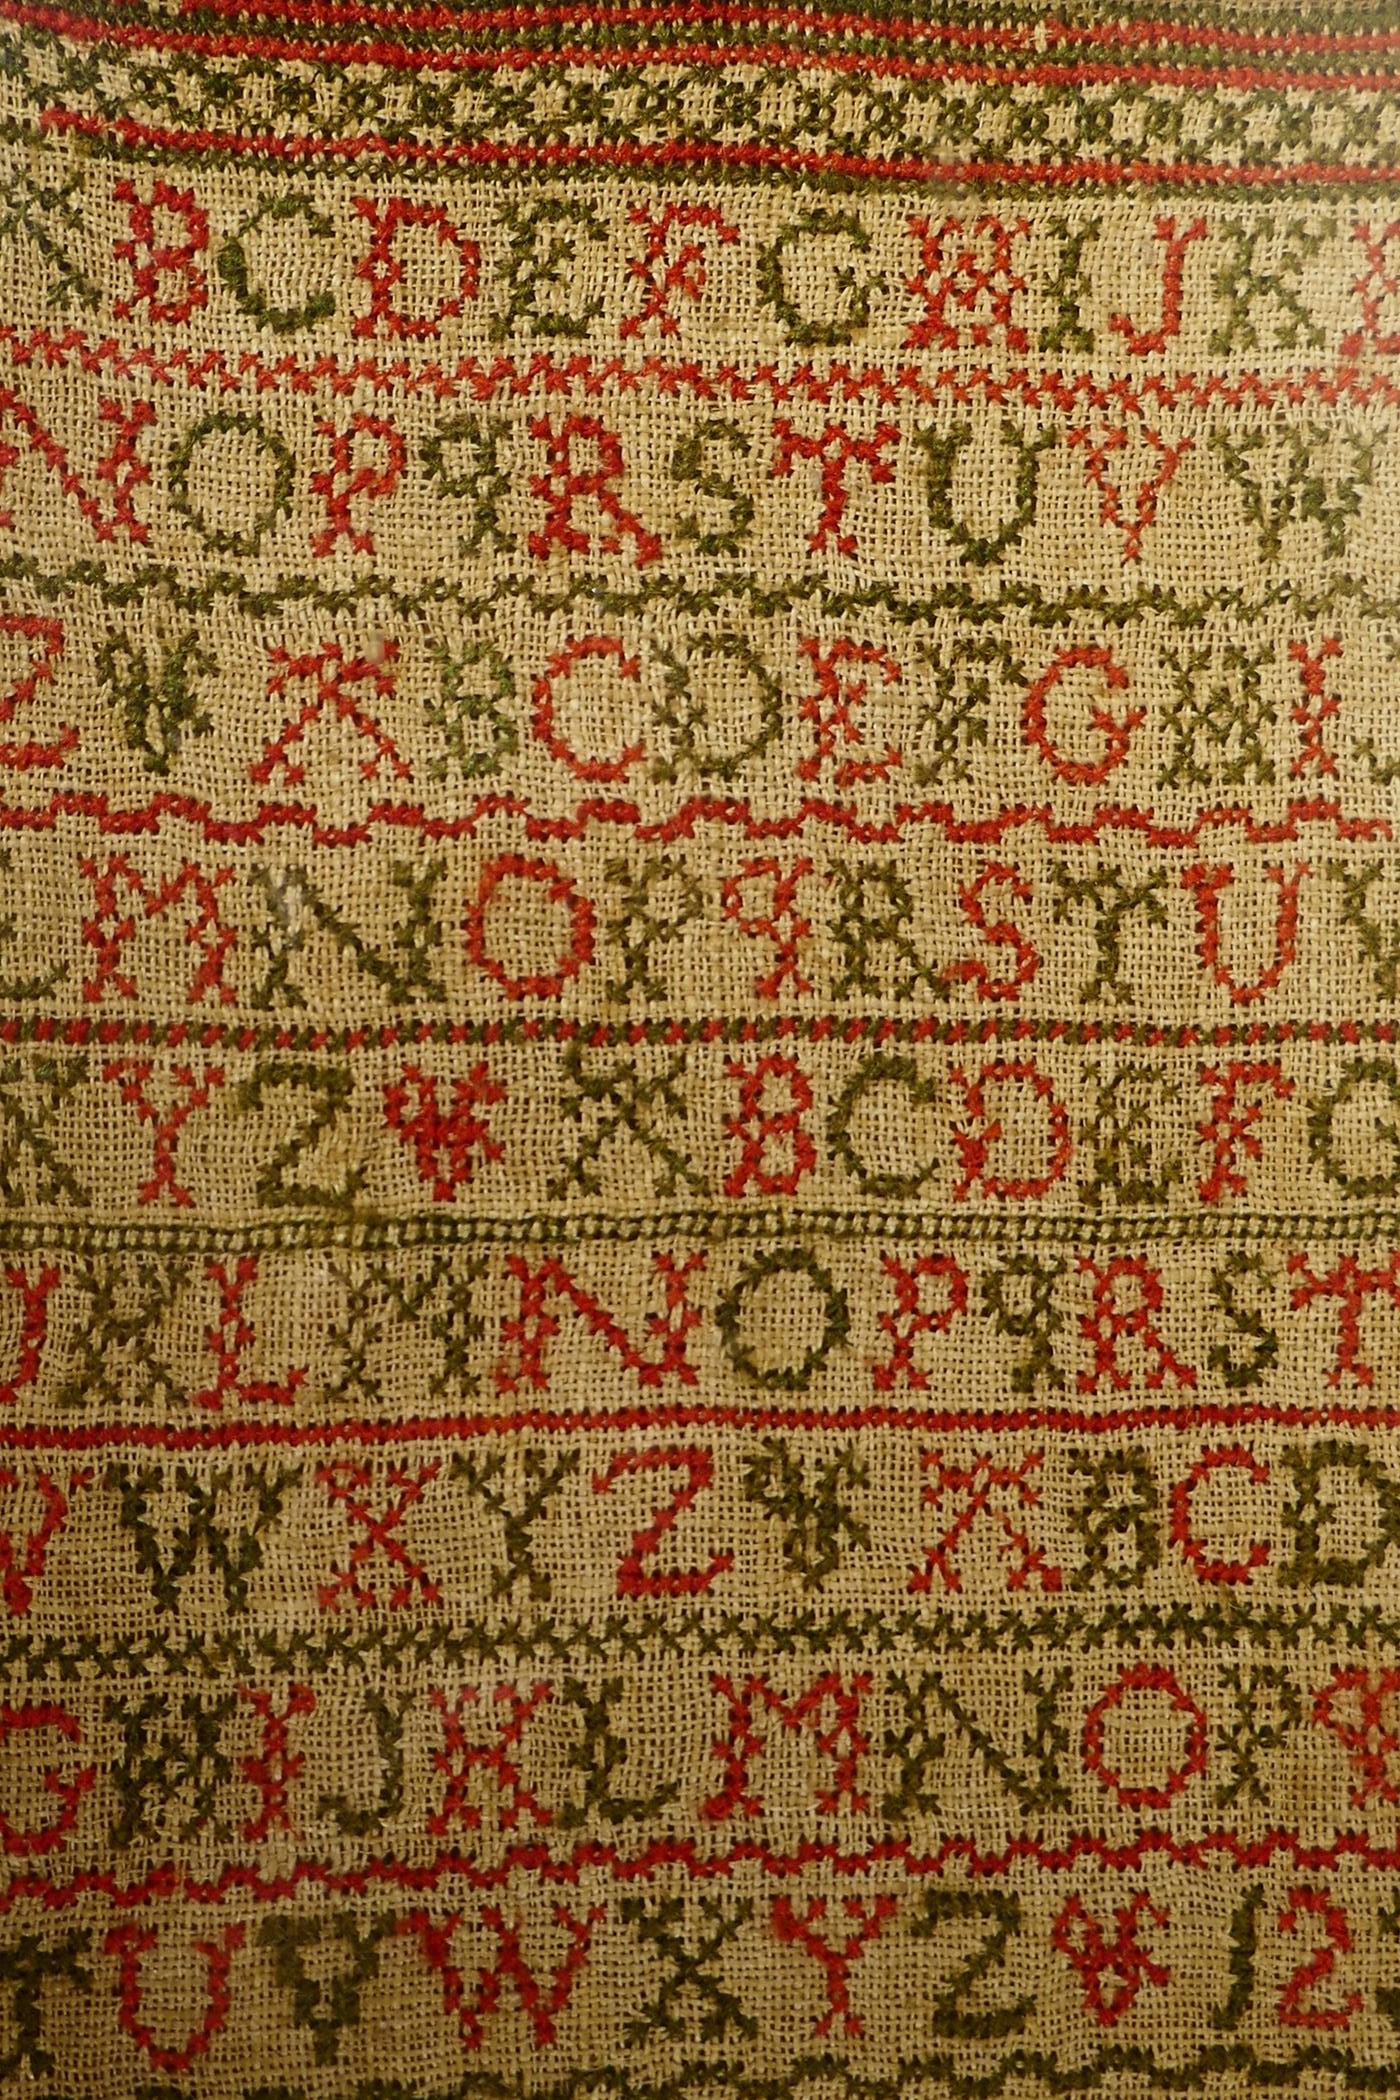 An early C19th hand stitched sampler in cross stitch by 'Jane Meek - 1822' (sister of Janet Meek), - Image 4 of 7